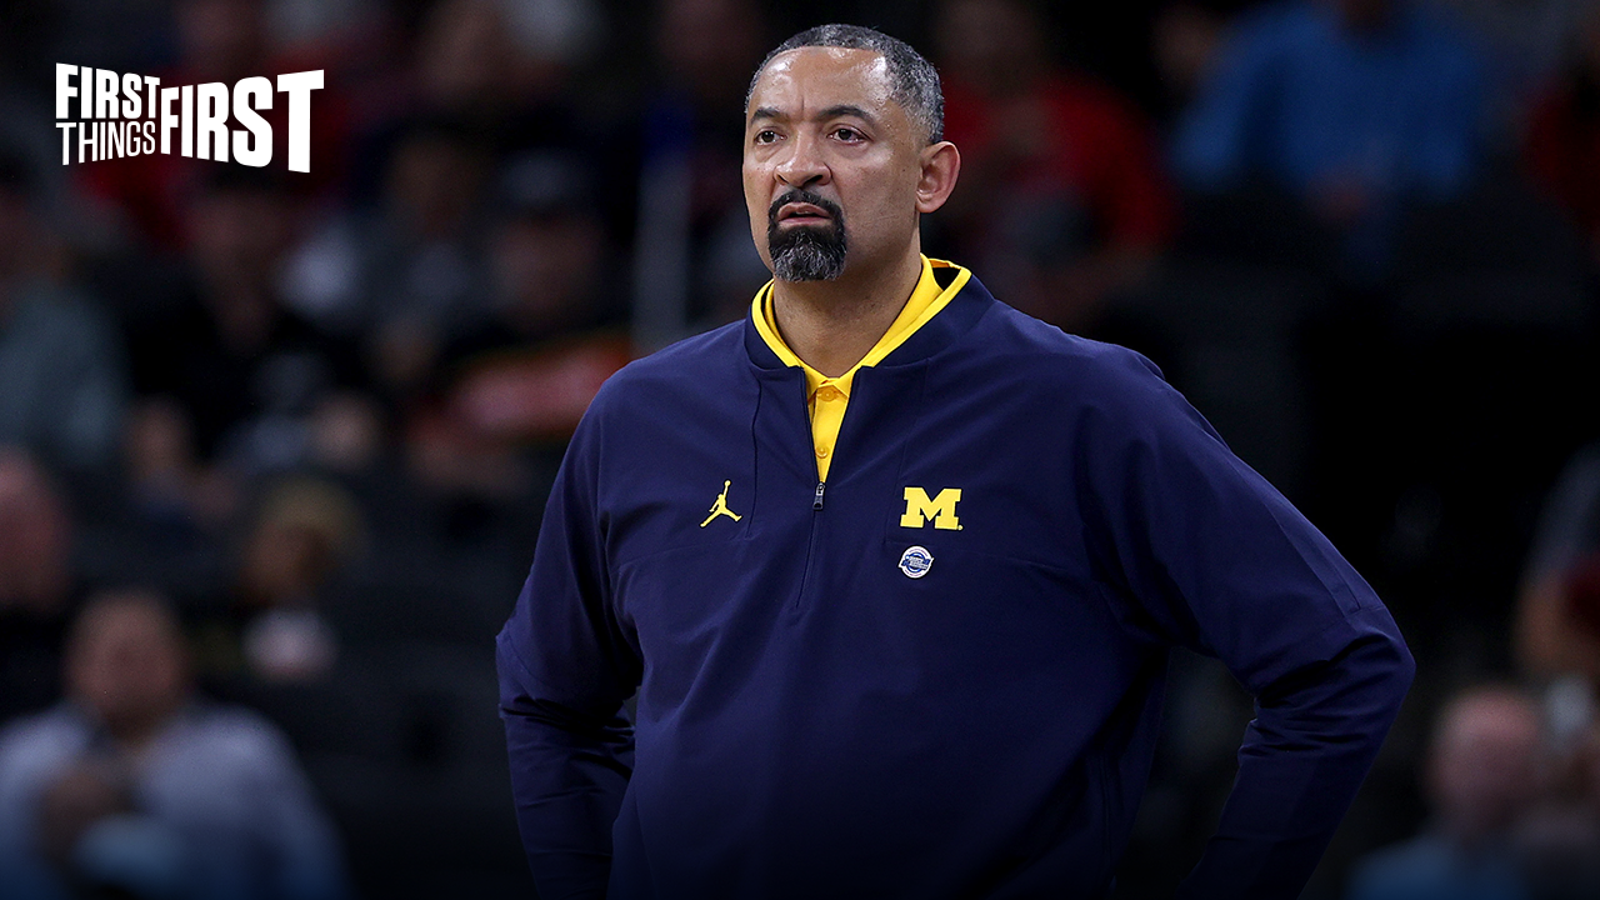 Juwan Howard passes on Lakers, coaching search continues